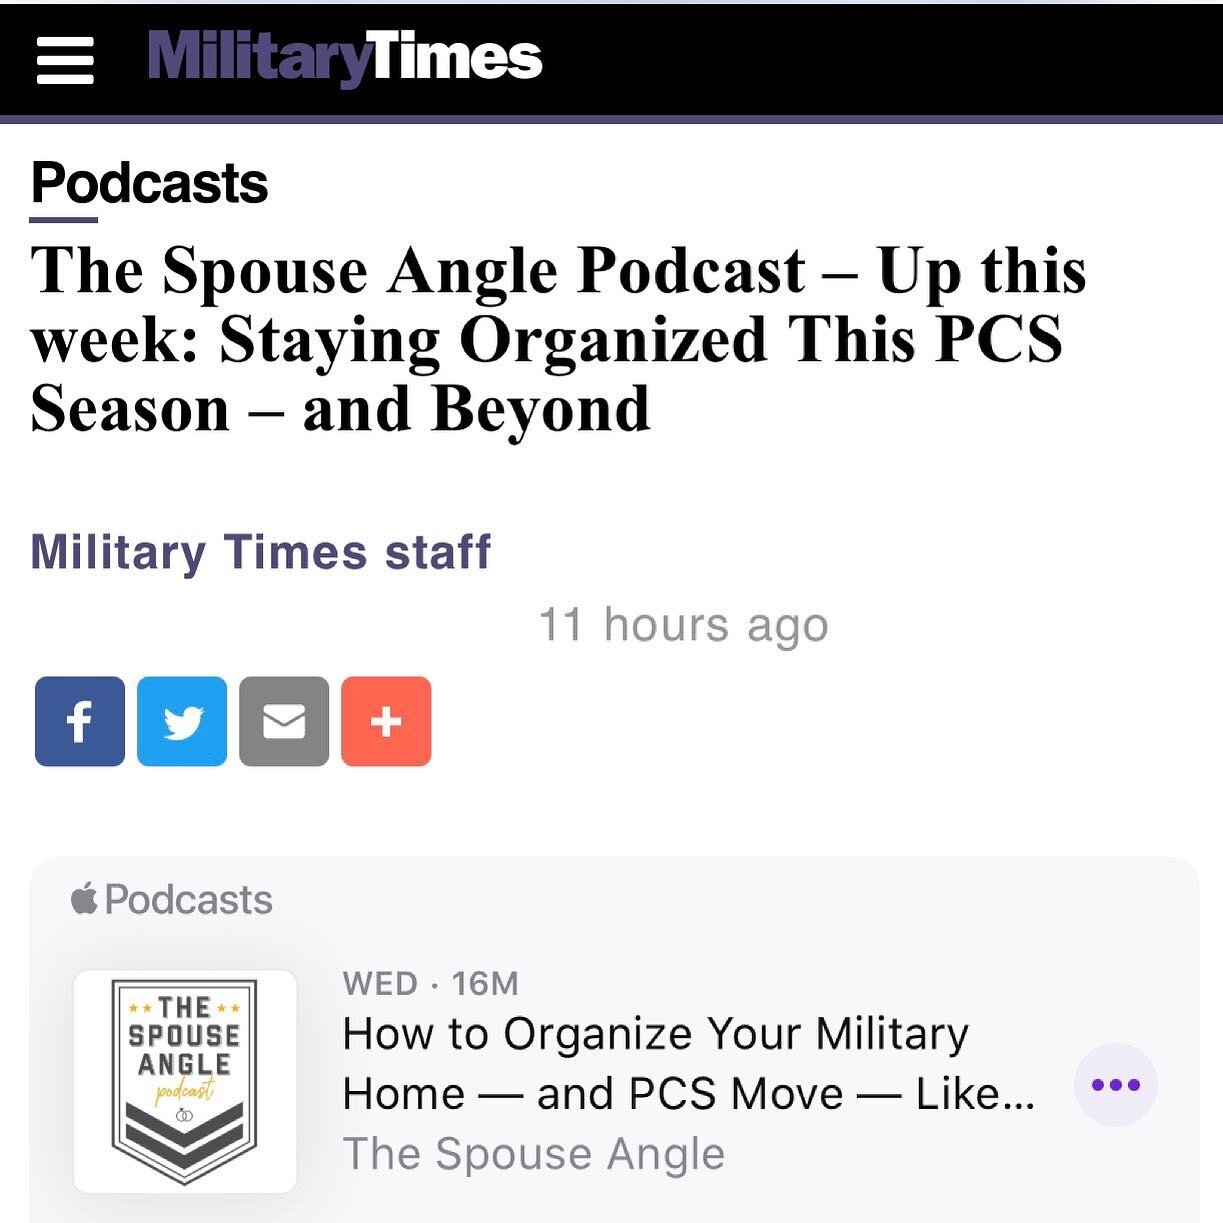 Wwwwhhhaattt???? Featured on @militarytimes today! HUGE honor during an insane mid-PCS week around here!